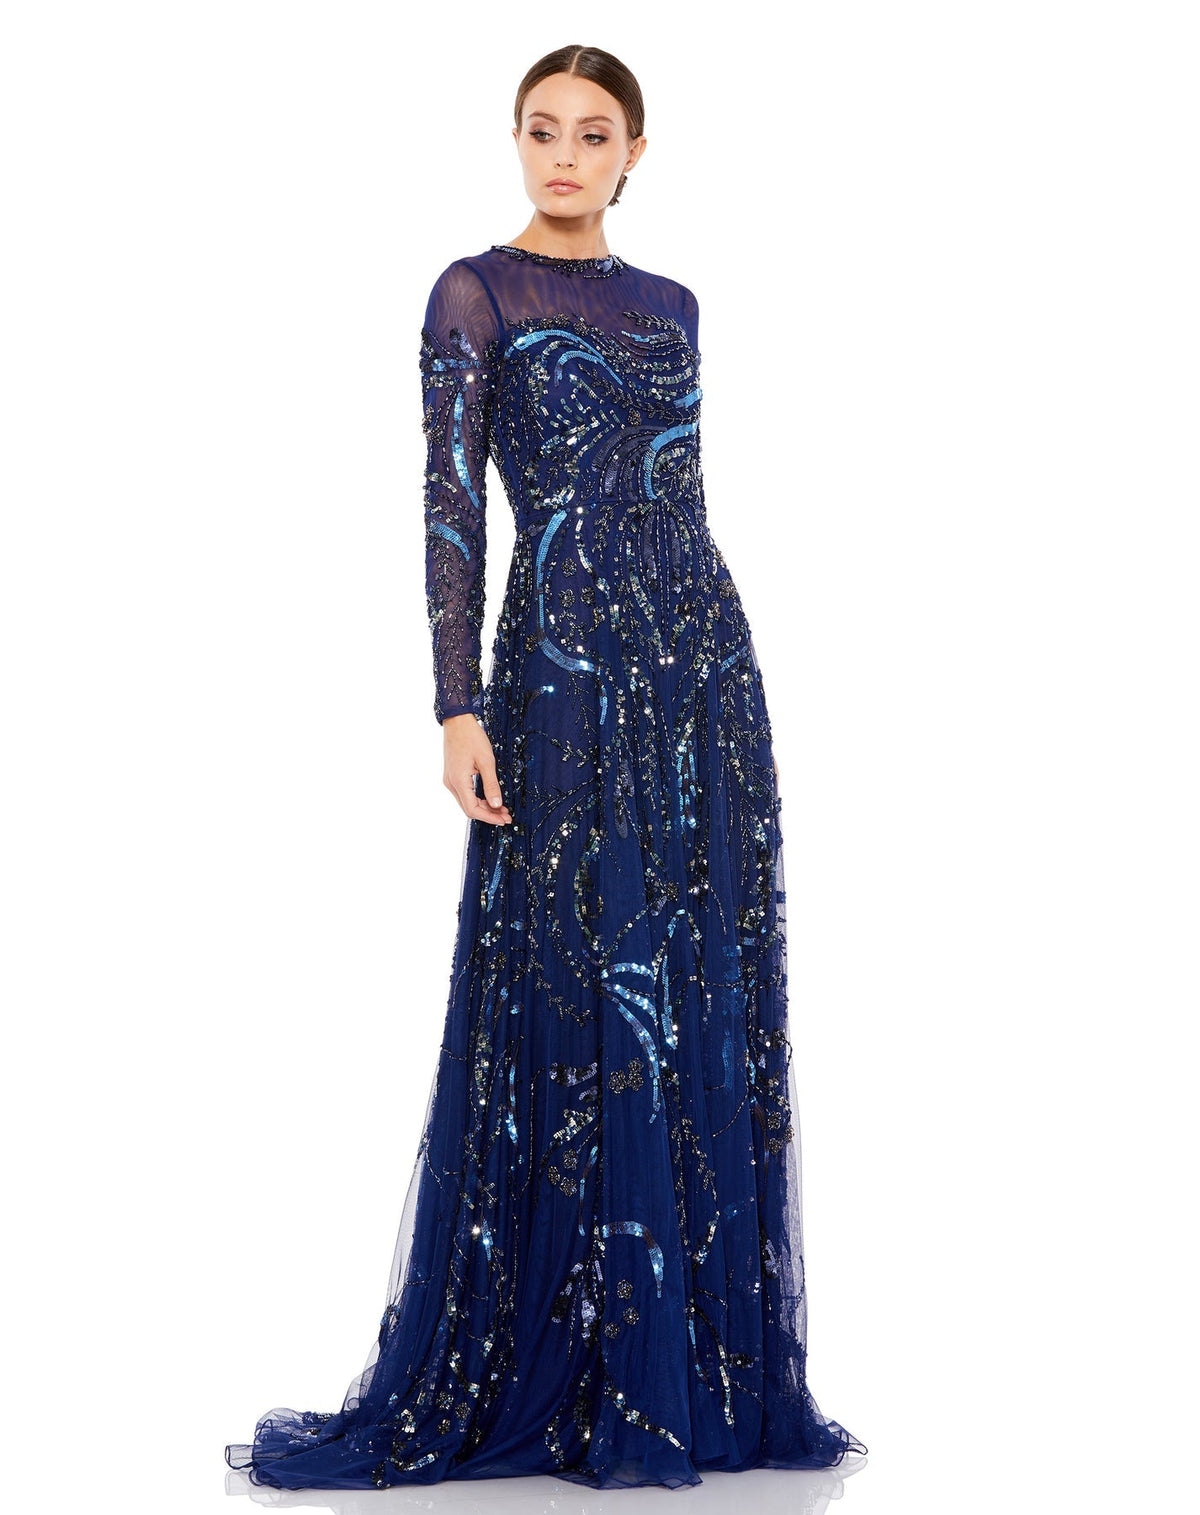 Mac Duggal, LONG SLEEVE EMBELLISHED ILLUSION EVENING GOWN, Style #5217, modest evening gown, midnight navy